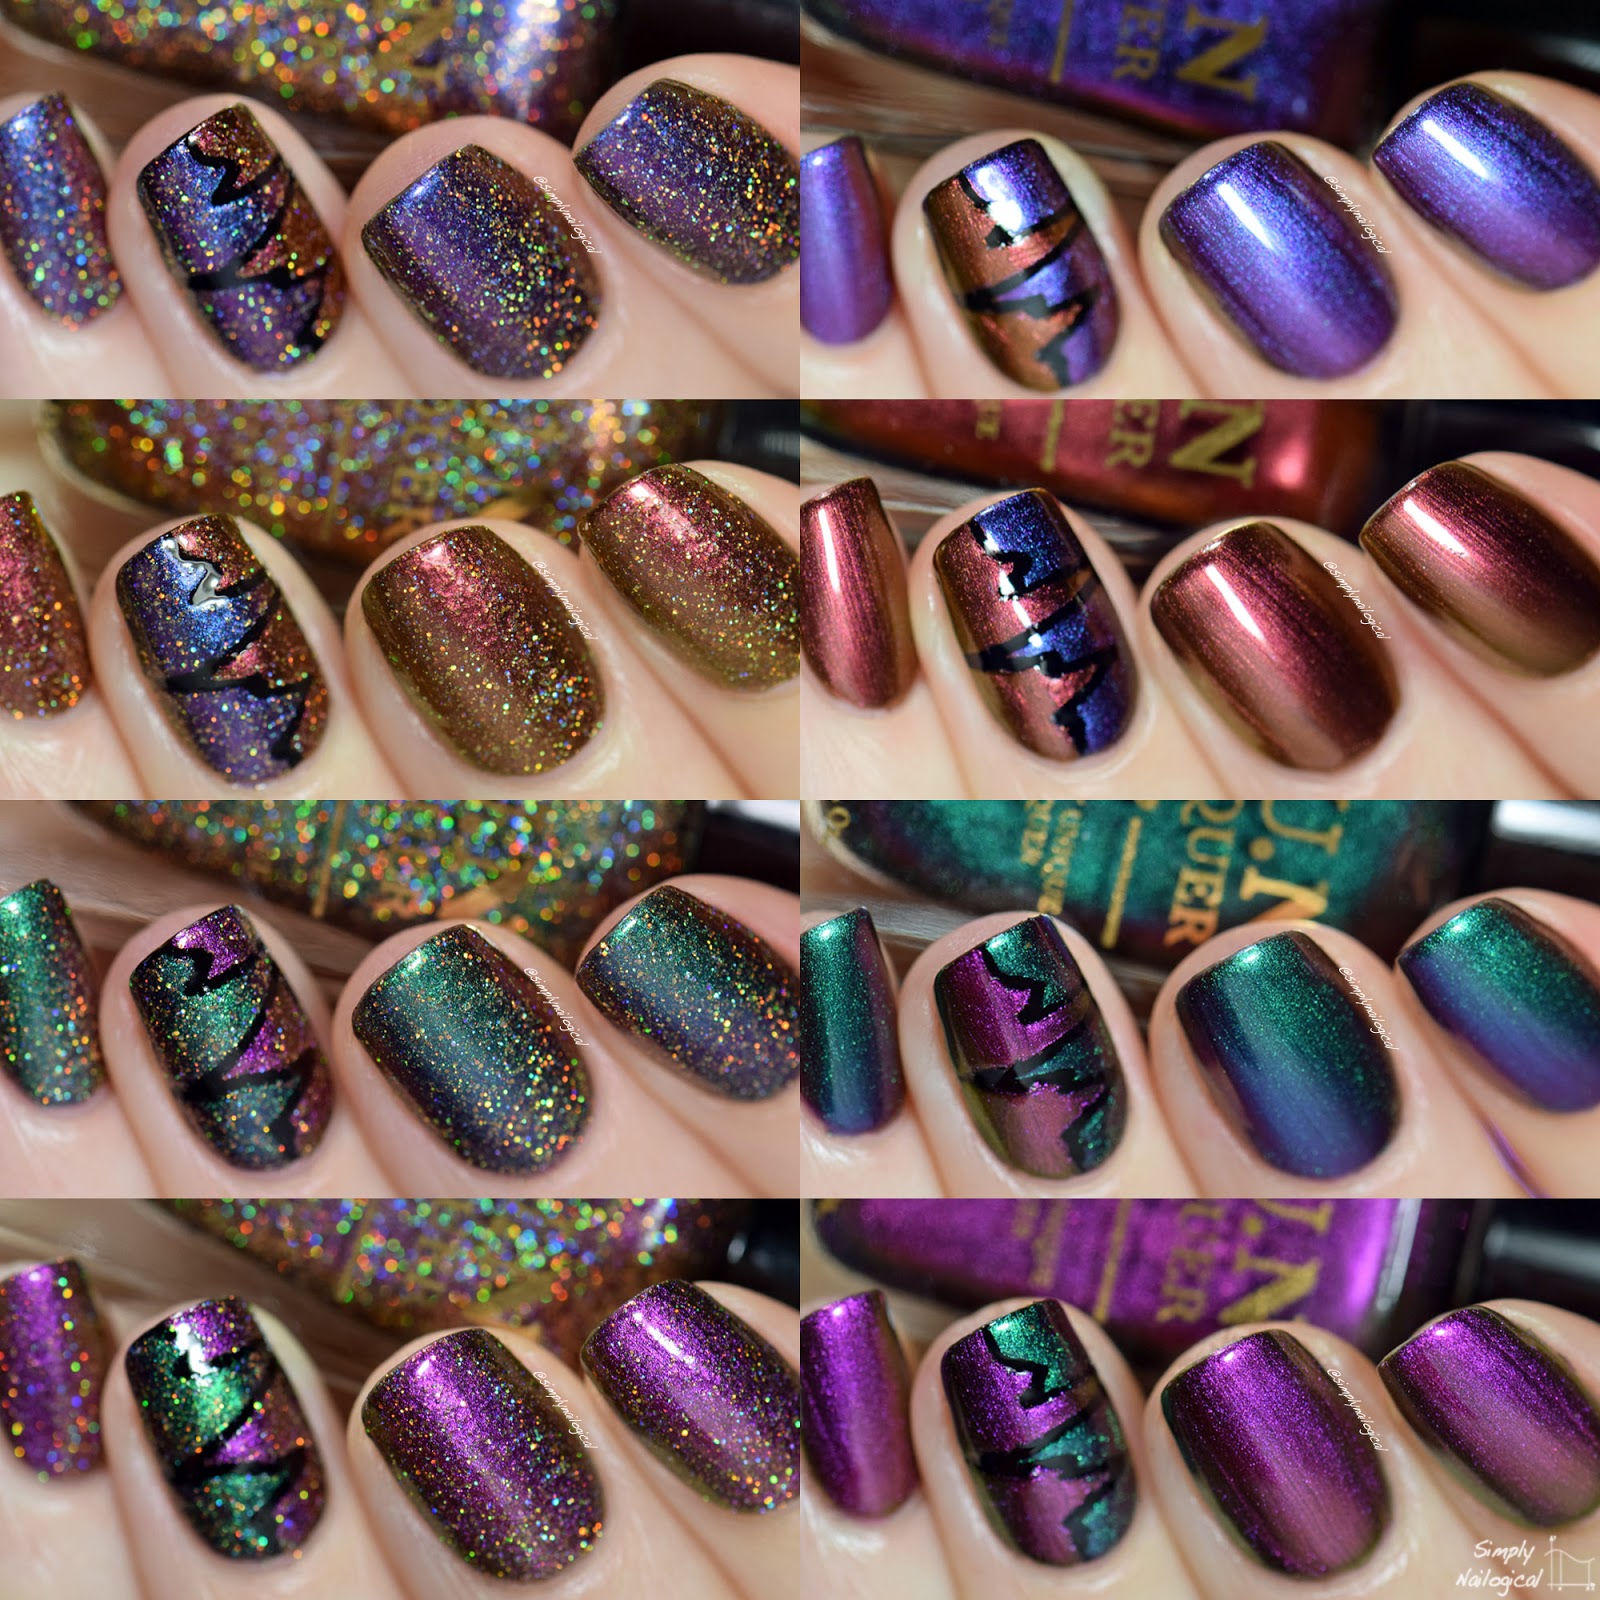 Fun Lacquer 2015 New Years Collection